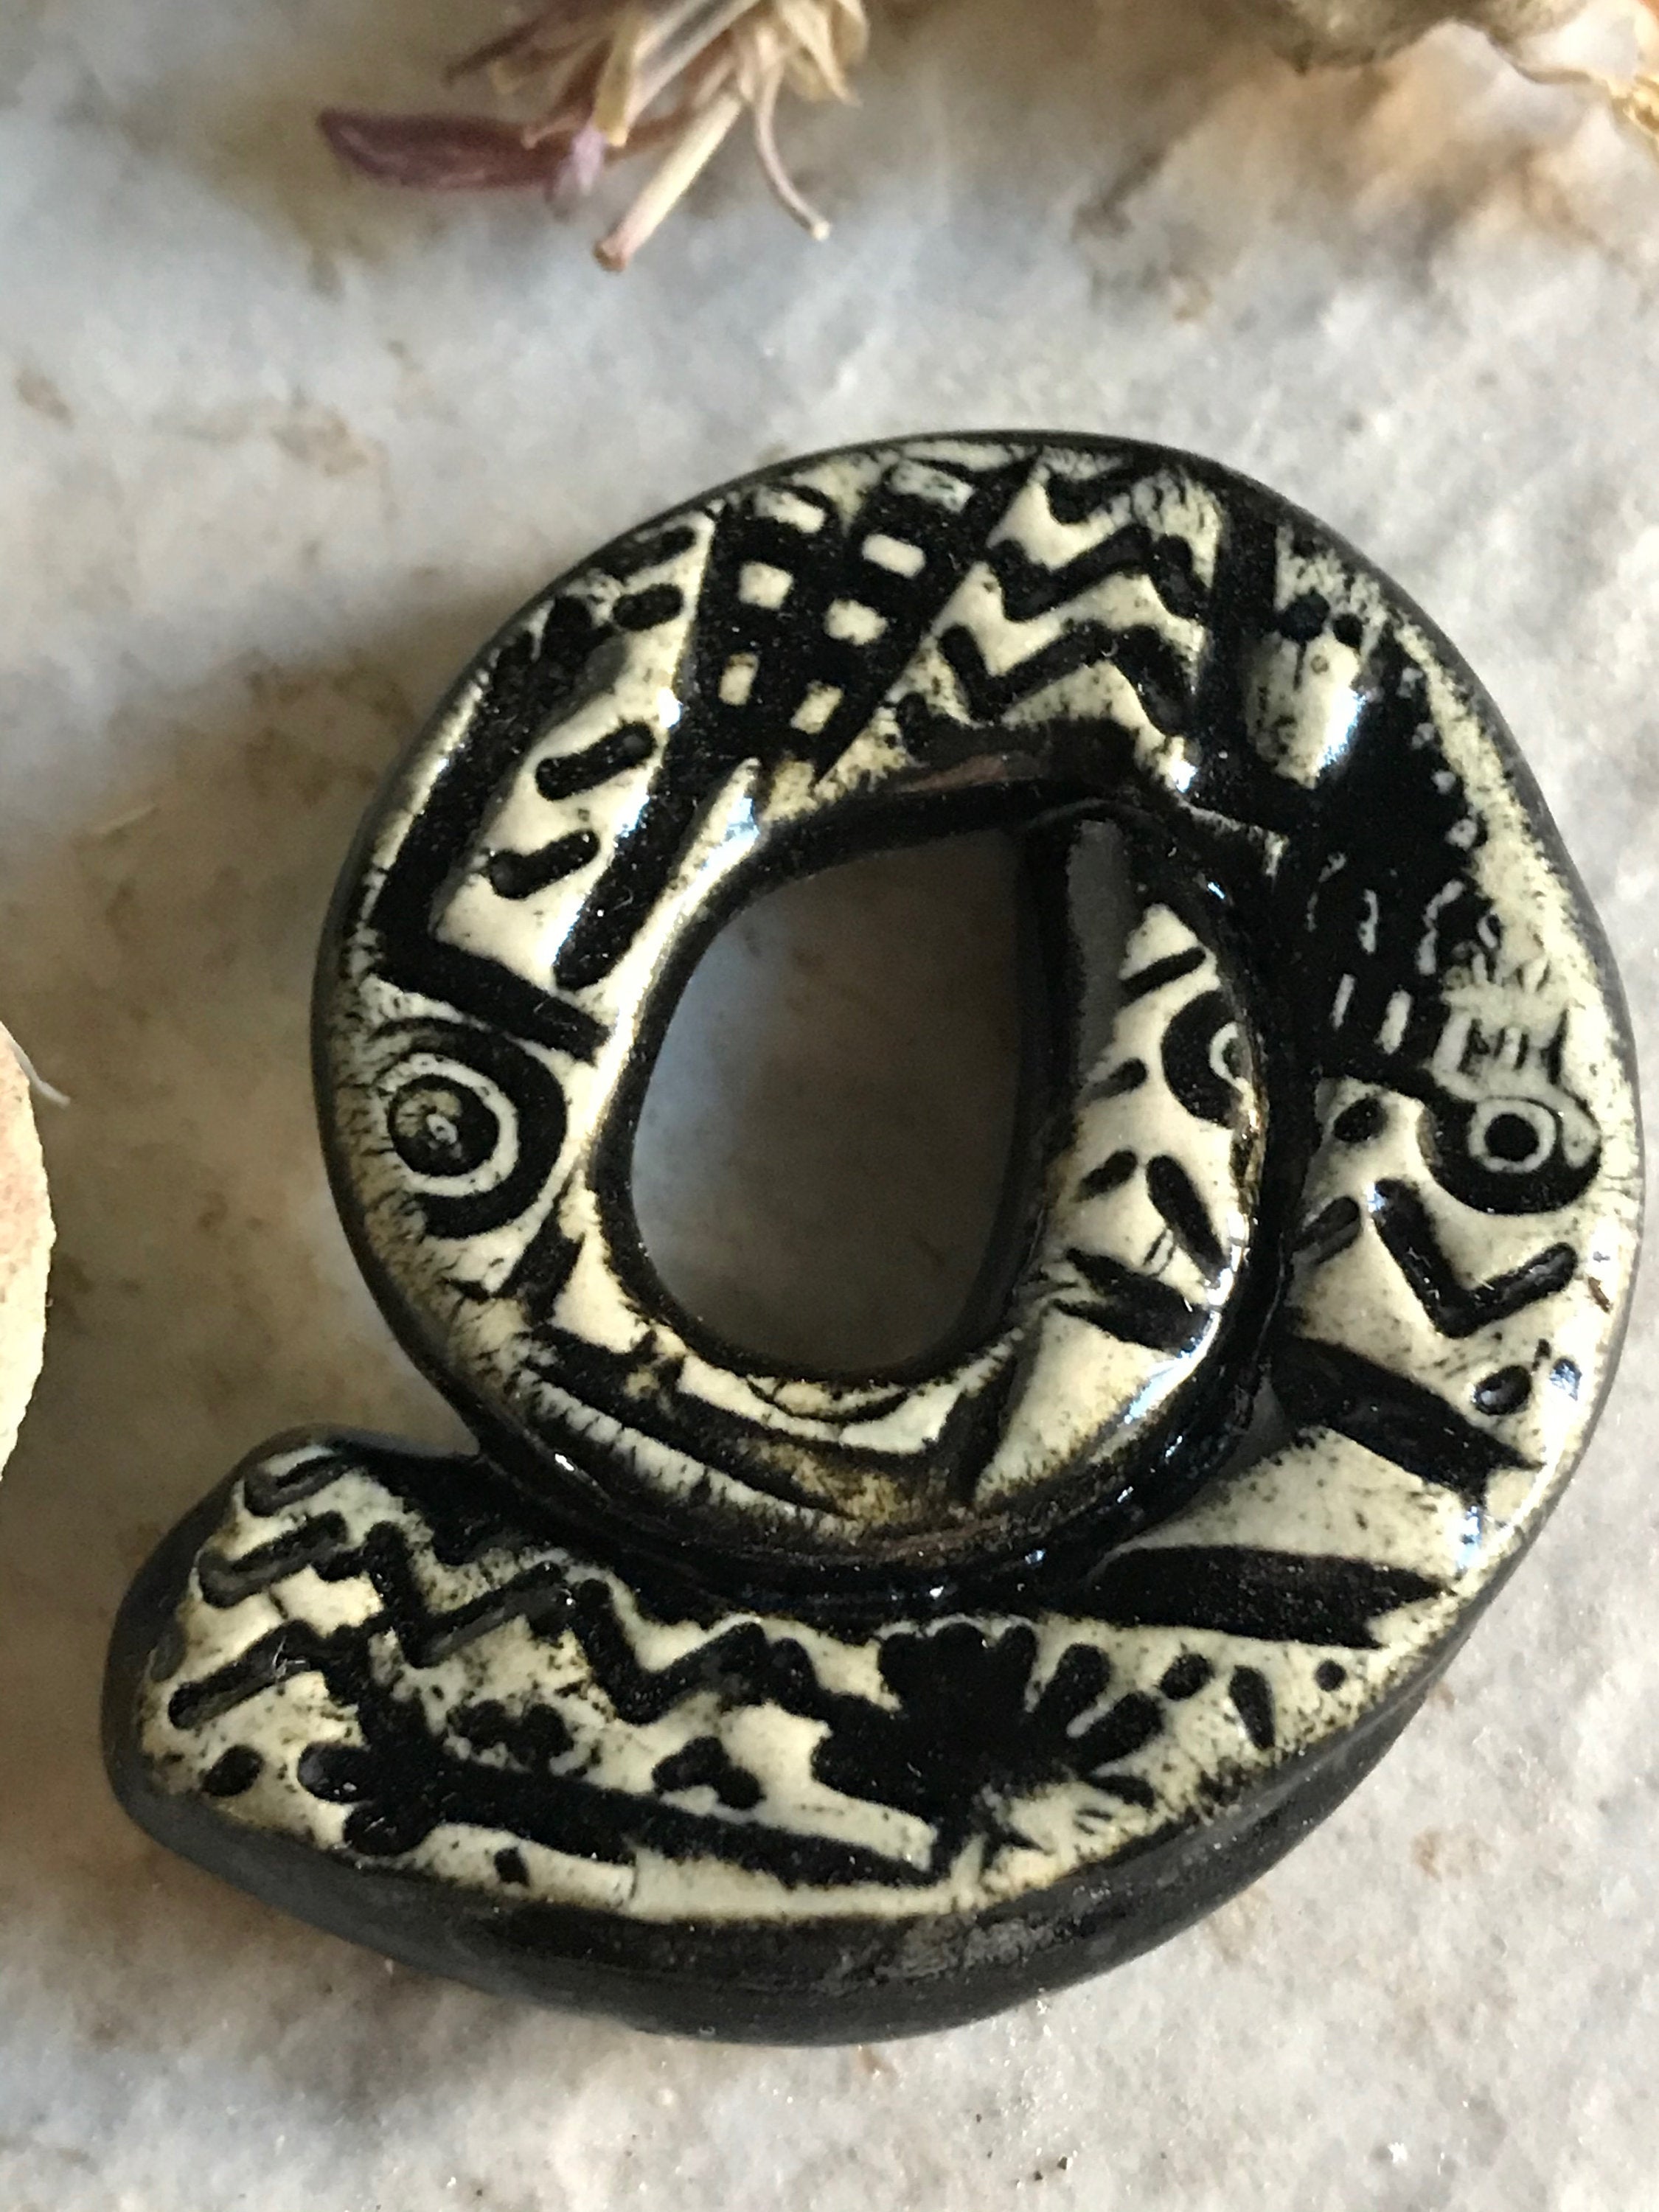 Charcoal Spiral Ceramic Focal Pendant Bead for Jewelry Making